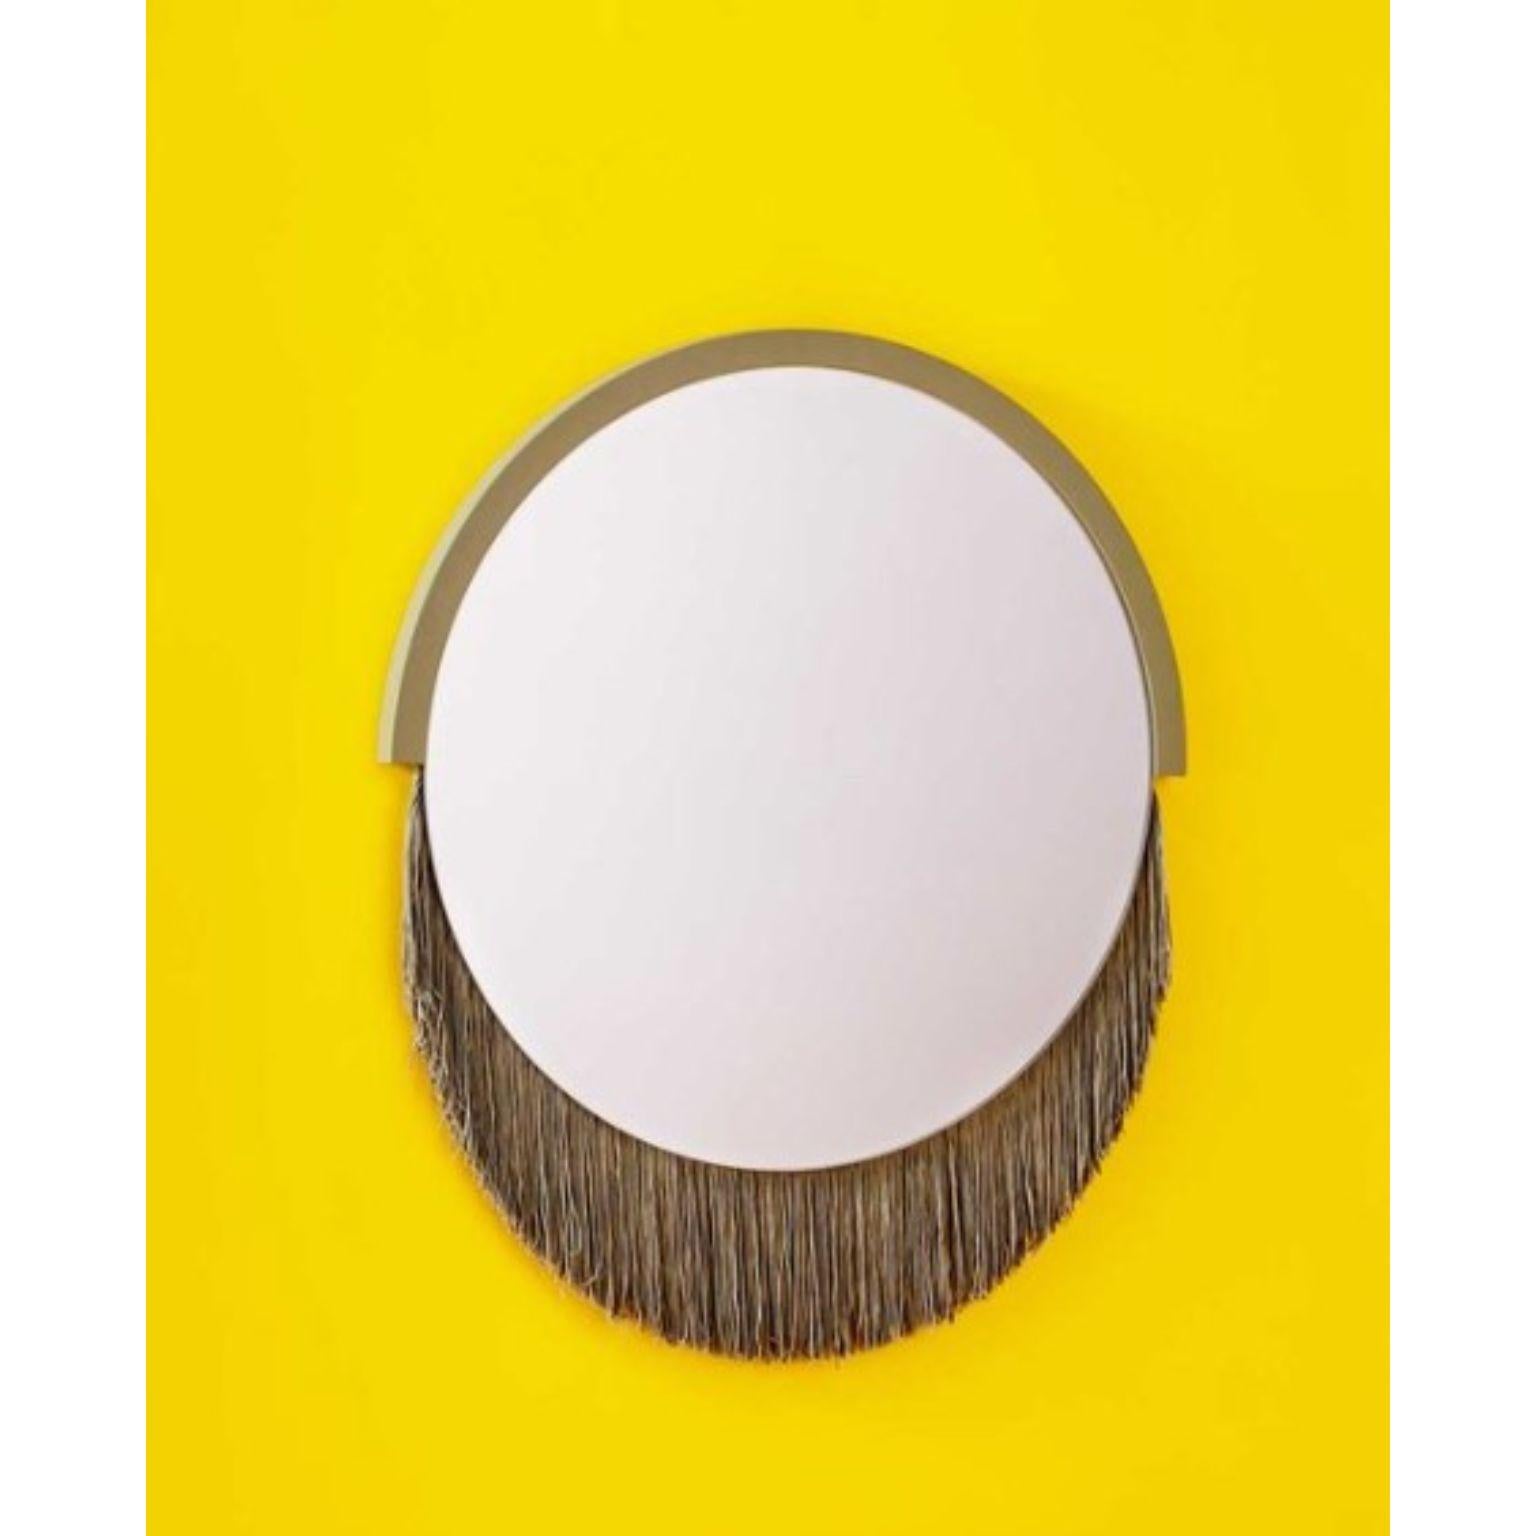 Contemporary Set of 4 Boudoir Wall Mirrors by Tero Kuitunen